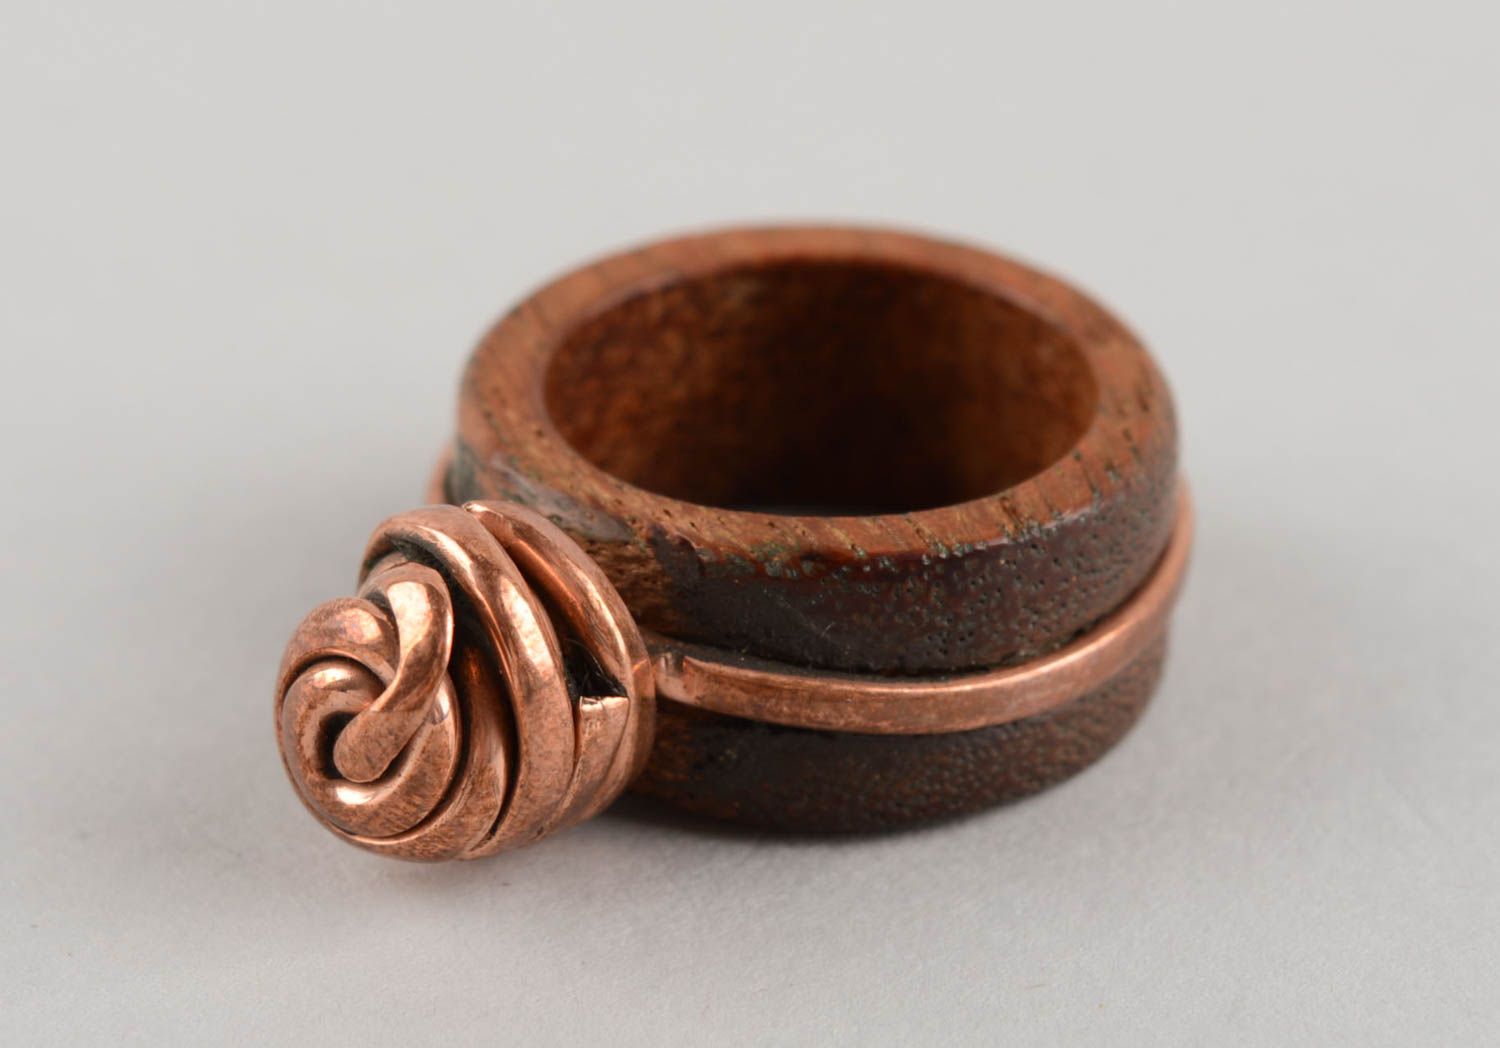 Extravagant cute jewelry handmade ring made of copper and wood for women photo 3